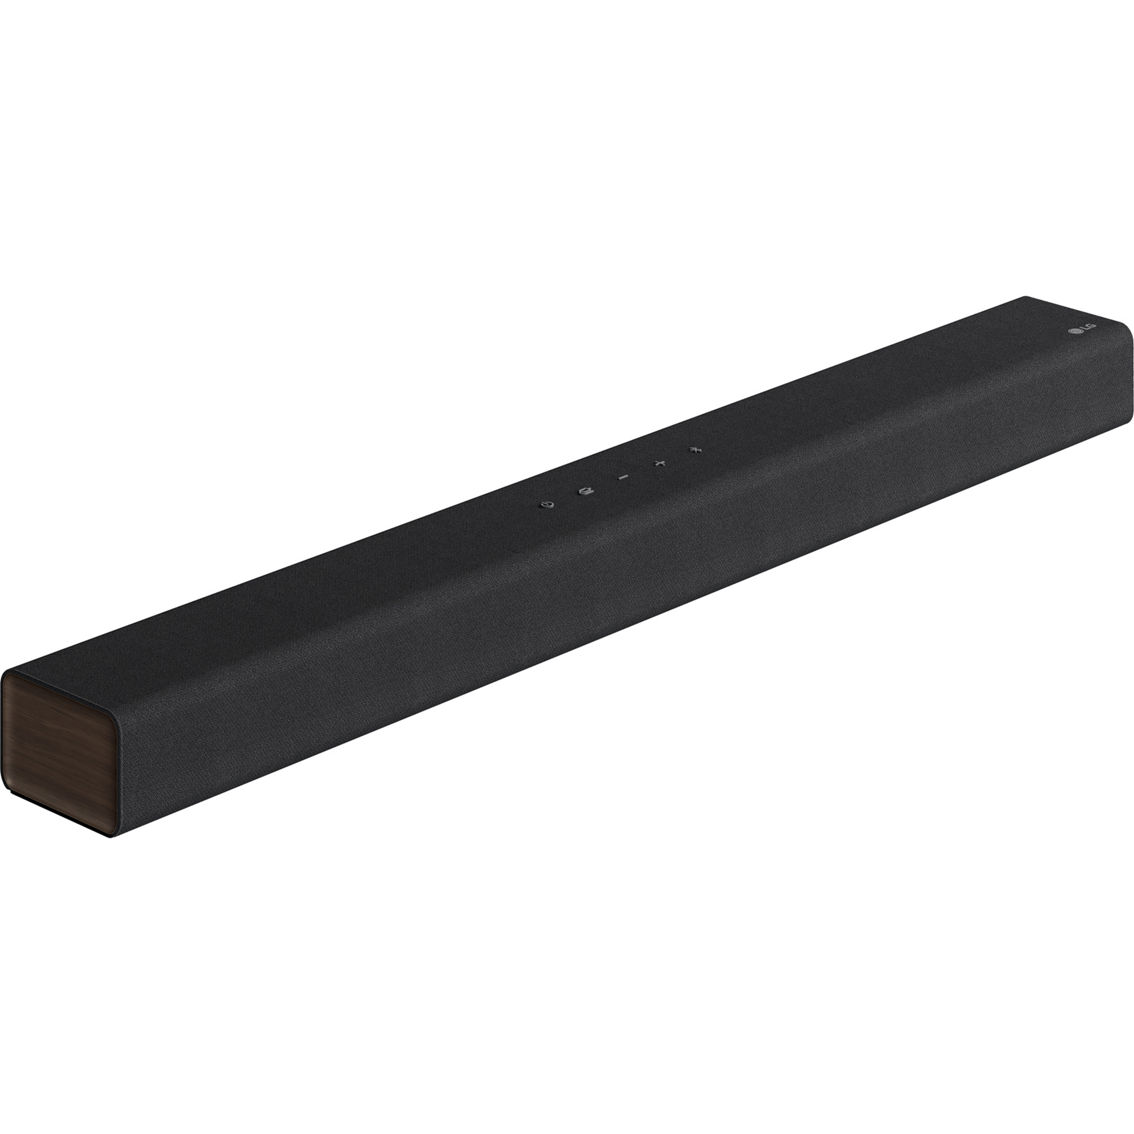 LG S40W 2.1 Channel 300W Sound Bar with Wireless Subwoofer - Image 3 of 7